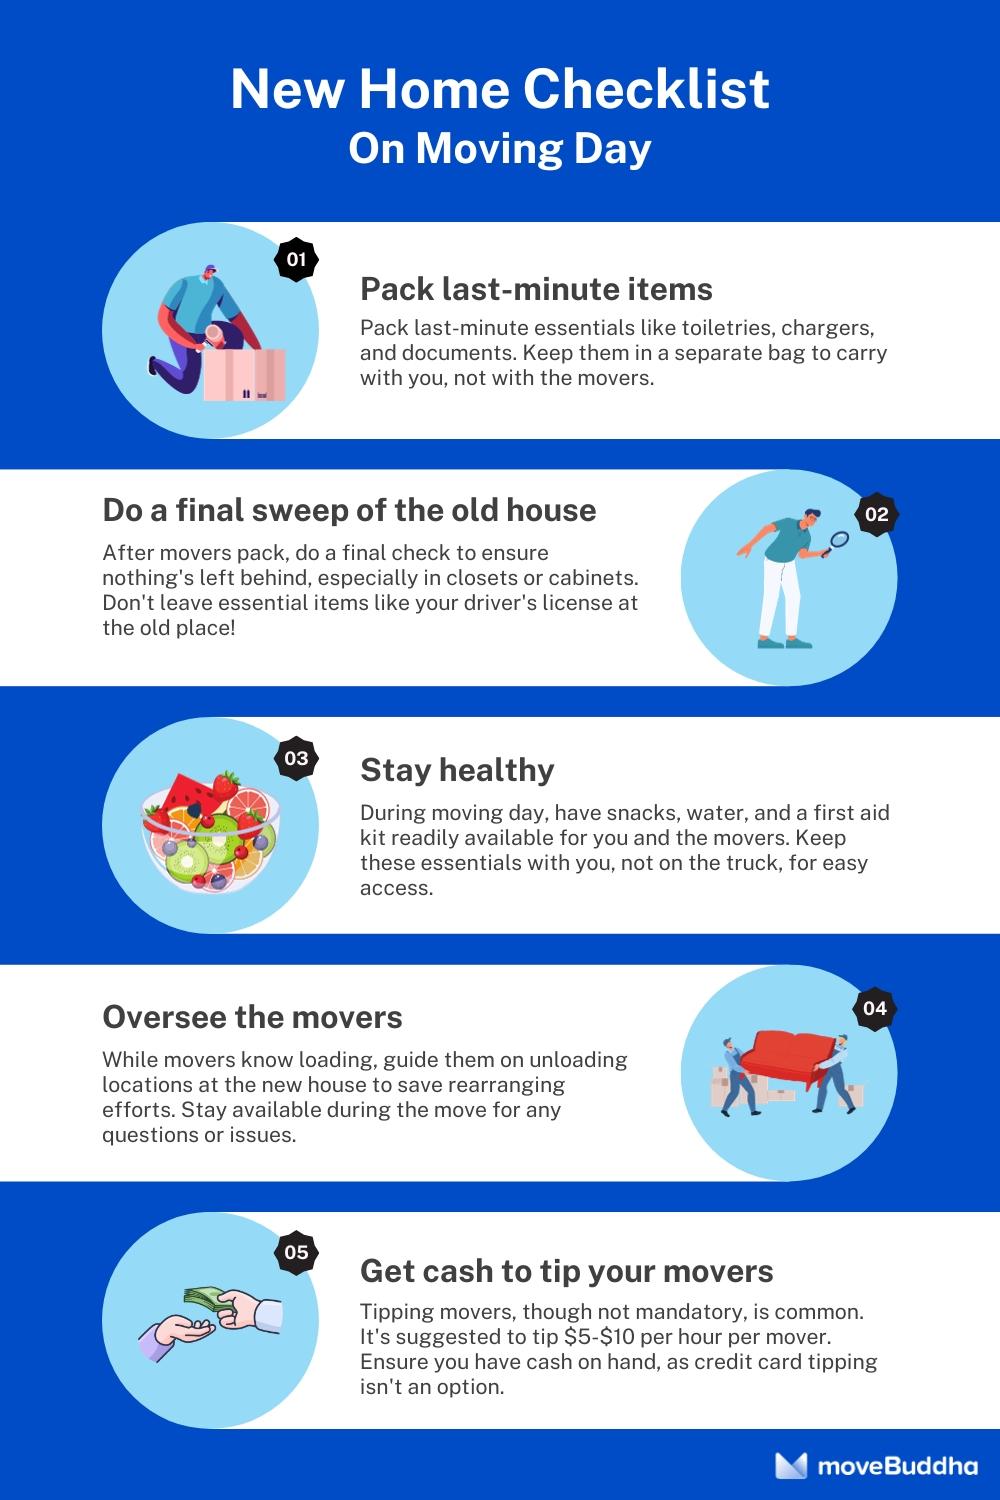 Home Checklist - 30 Things Everyone Should Keep in Their Home